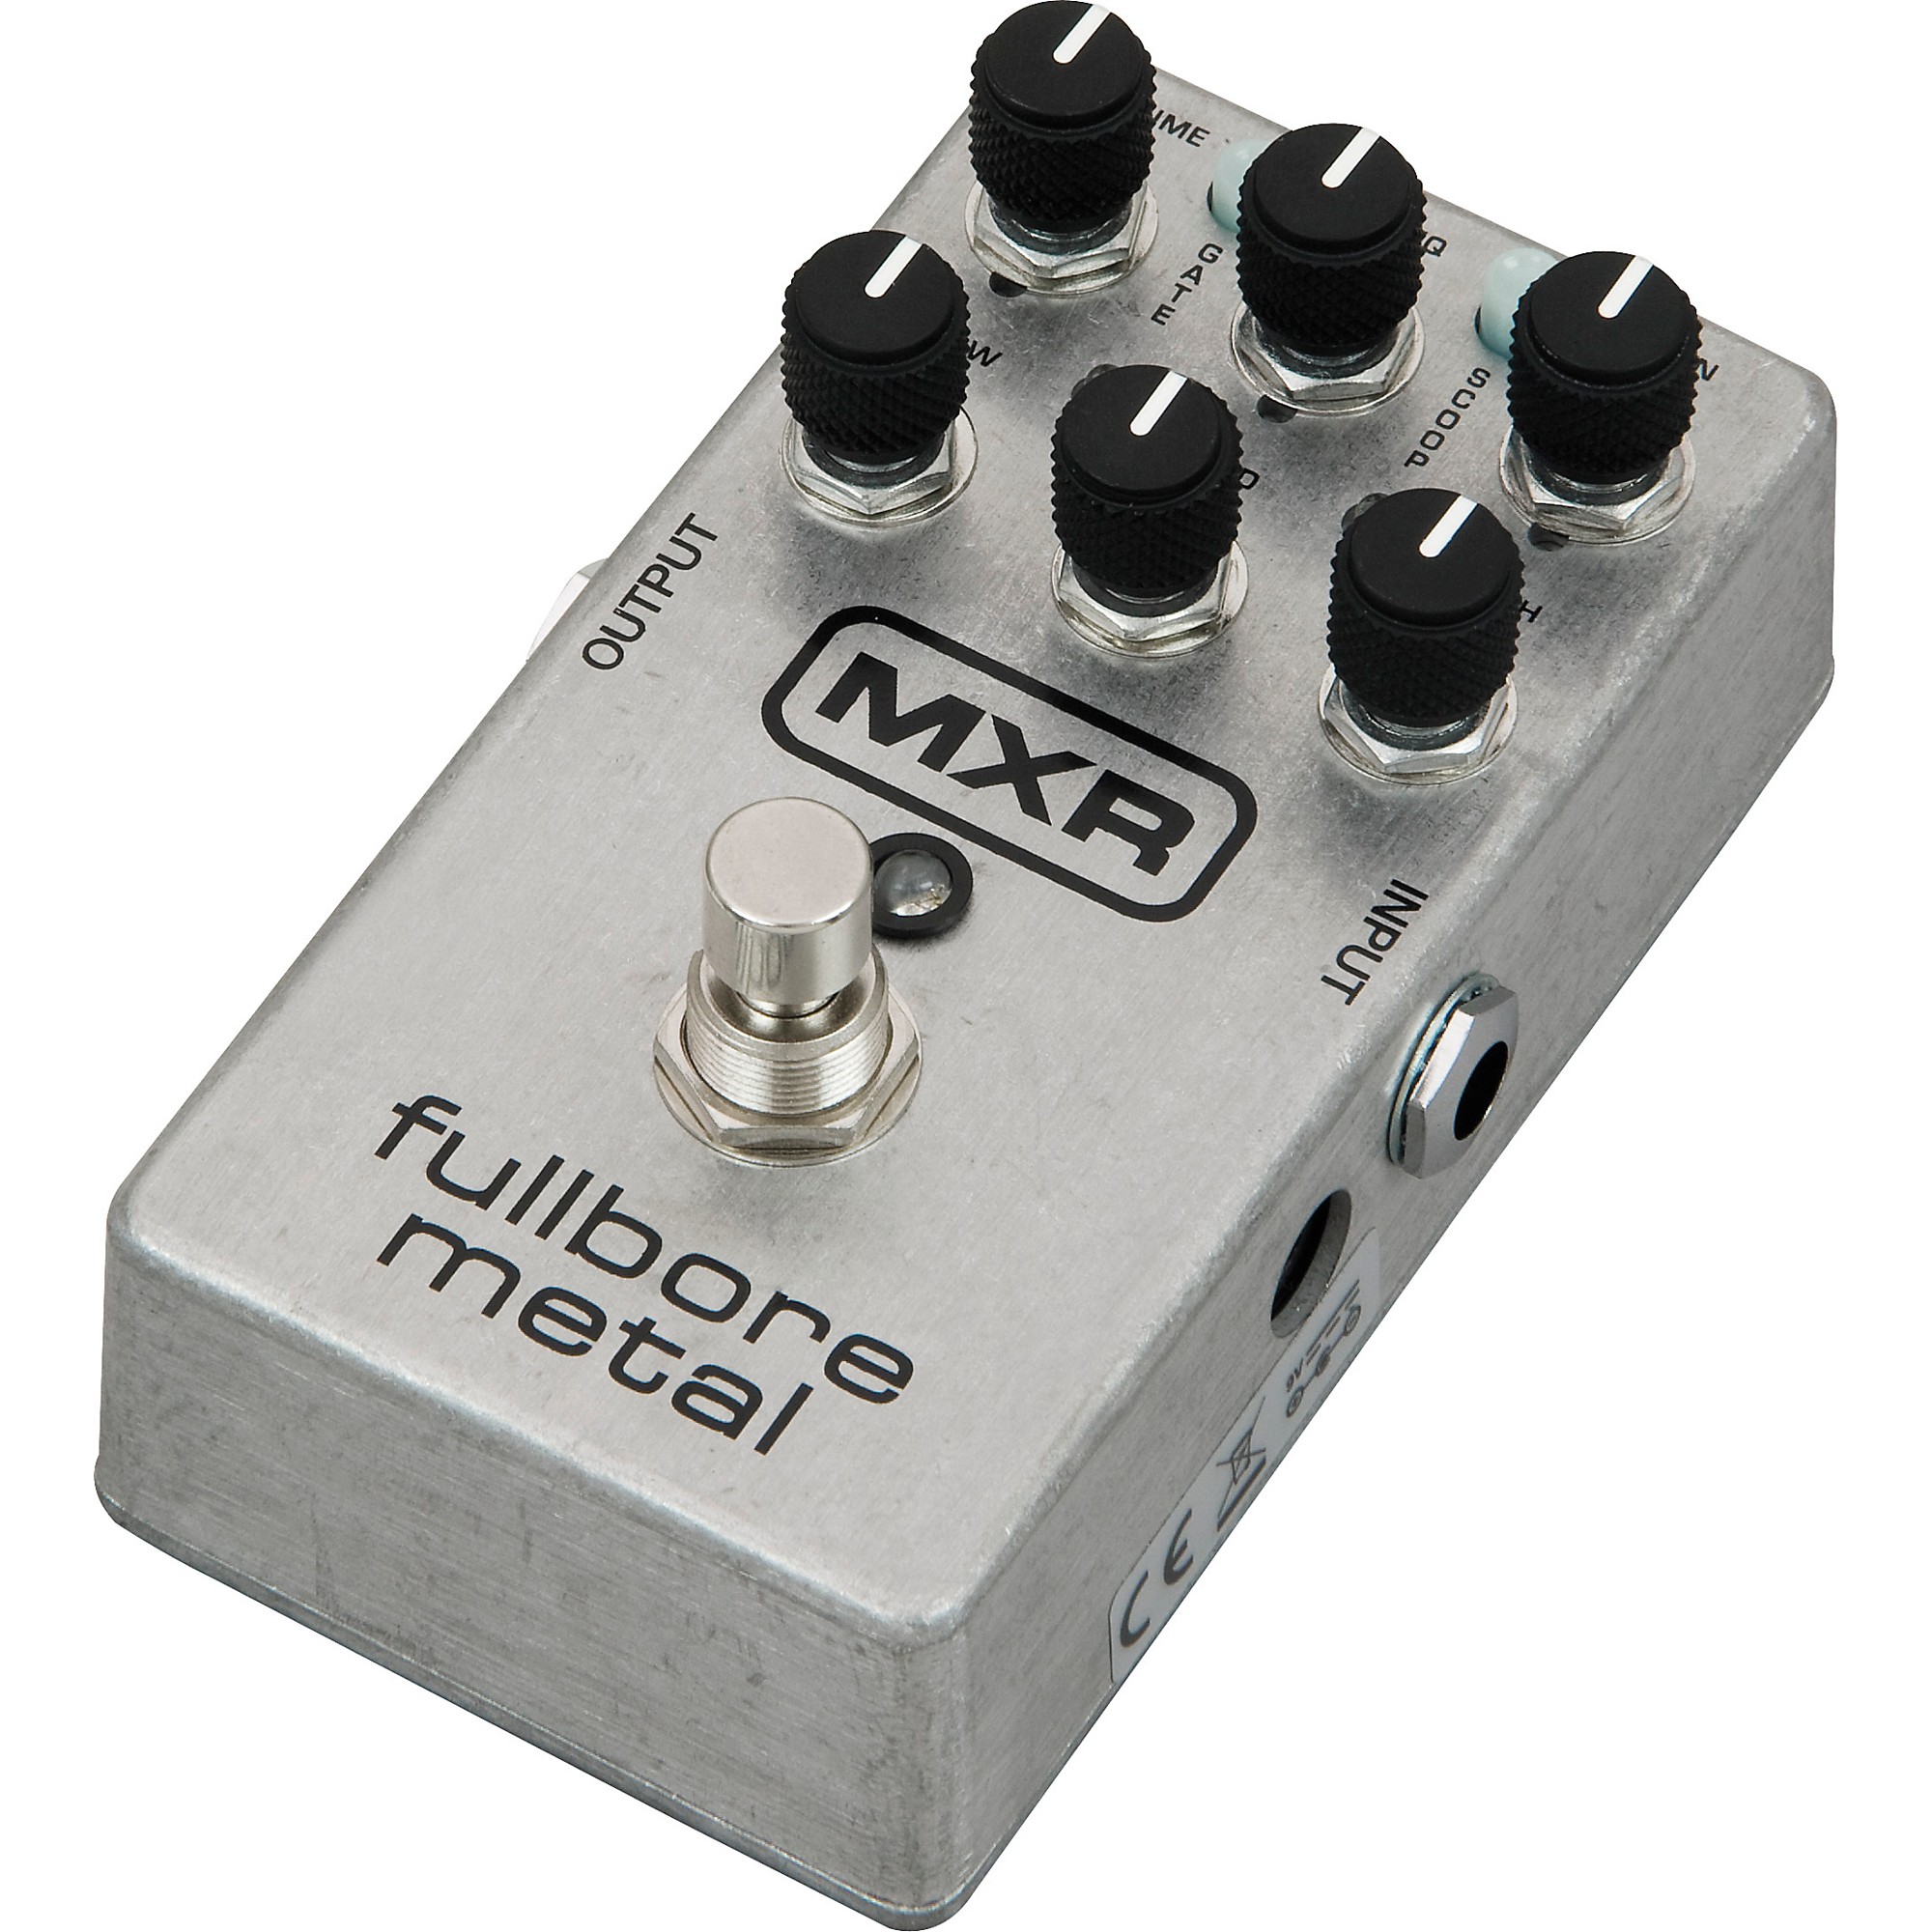 MXR M116 Fullbore Metal Distortion Guitar Effects Pedal With Free Barefoot  Bottom Silver V1 Guitar Center Standard Footswitch Cap